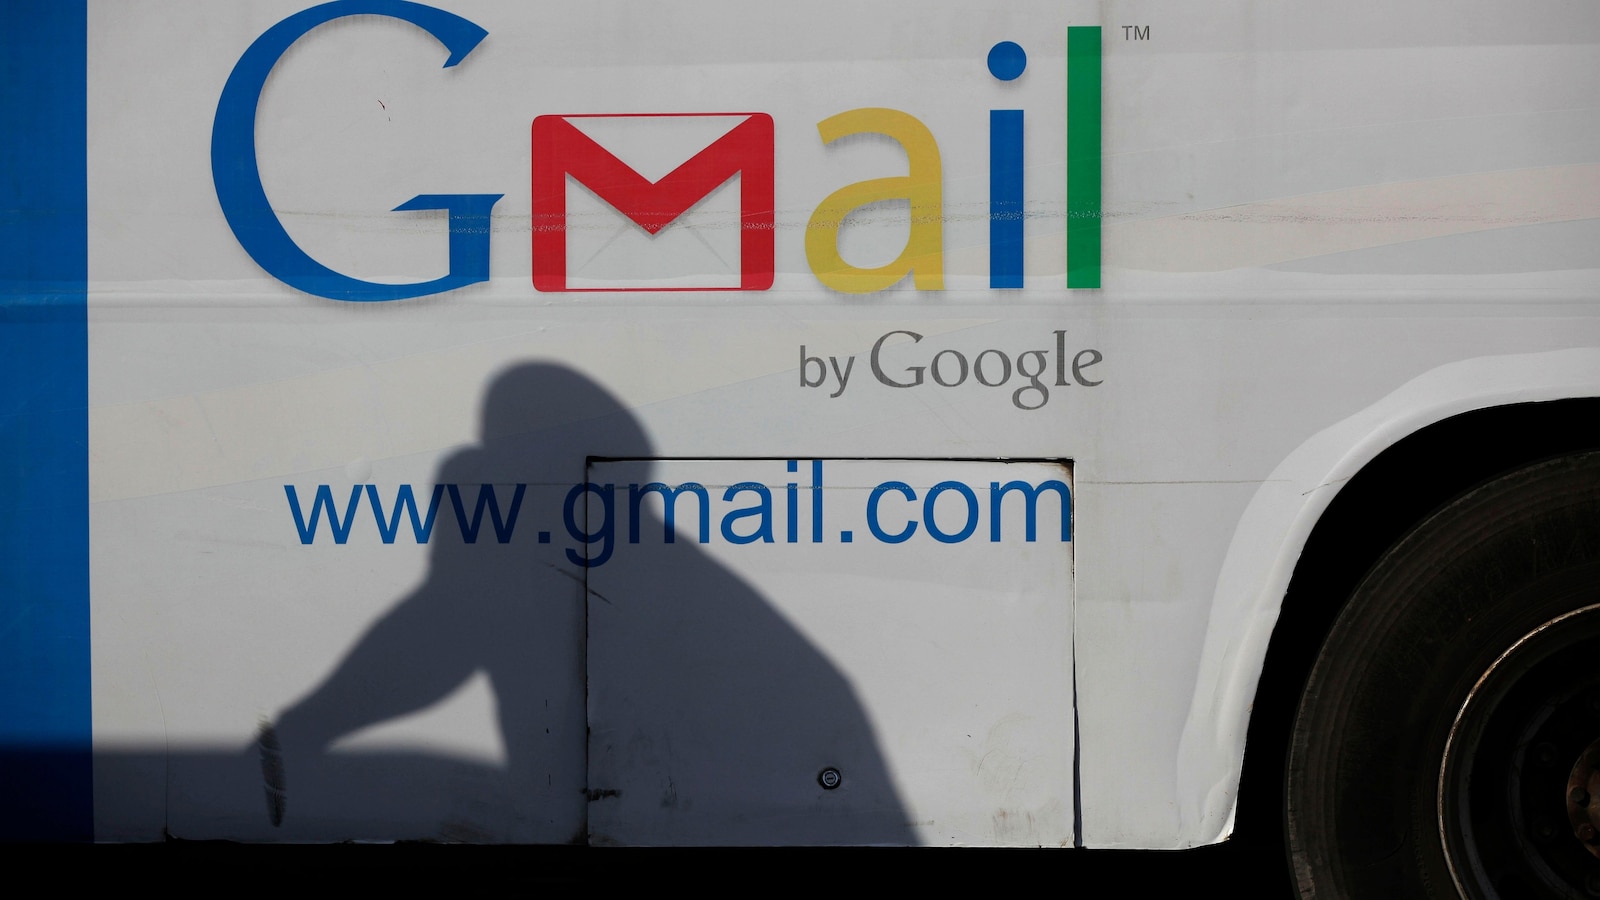 Gmail revolutionized email 20 years ago. People thought it was Google's April Fools' Day joke